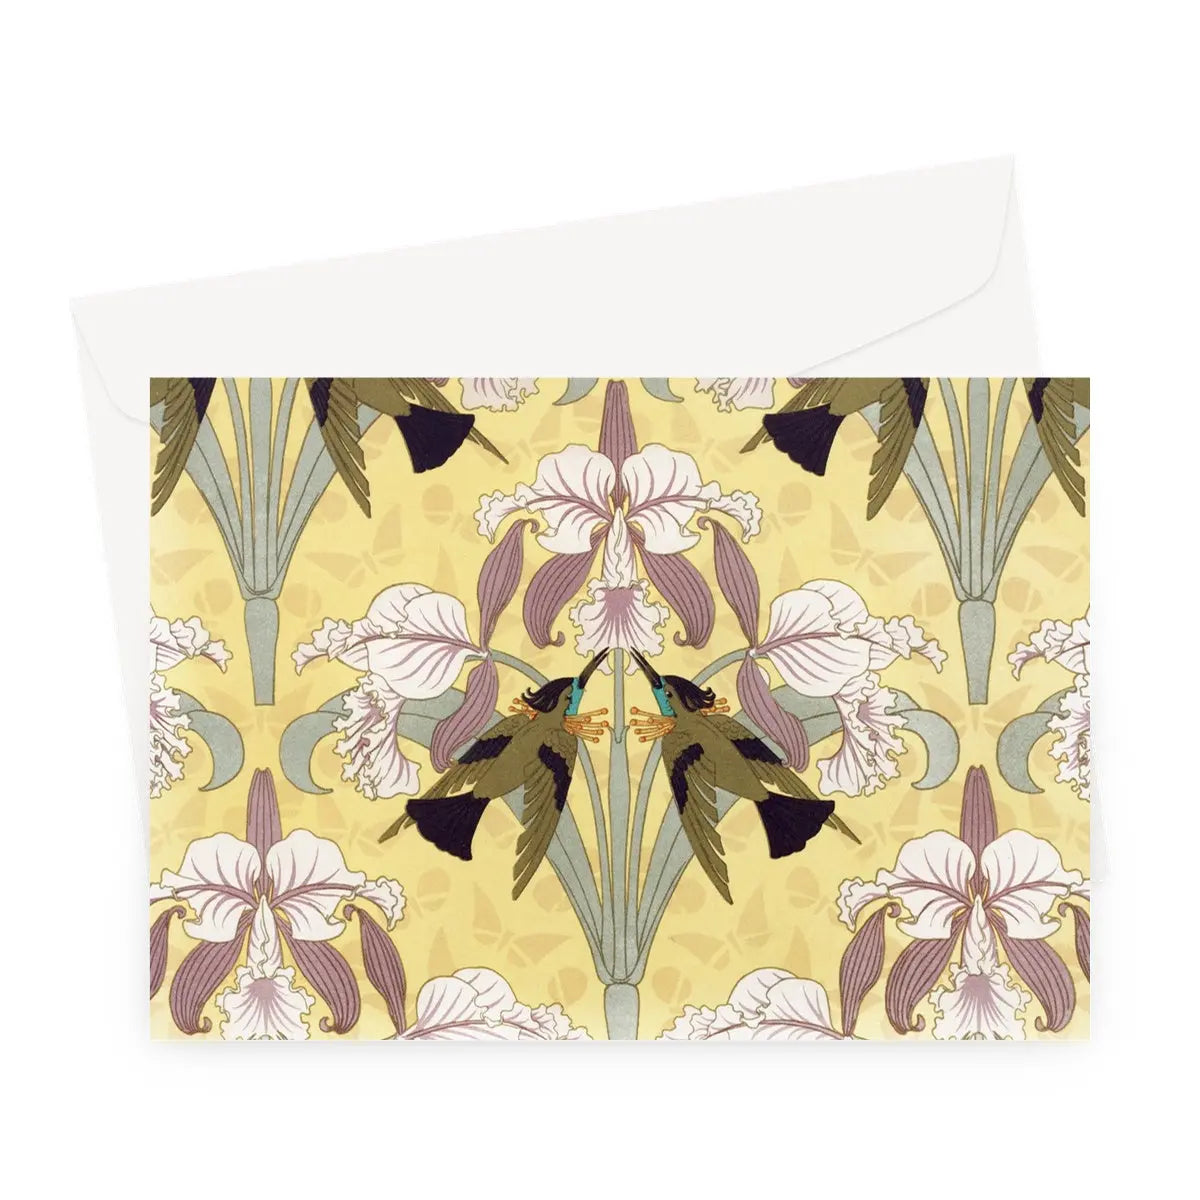 Oiseaux-mouches Et Orchidées By Maurice Pillard Verneuil Greeting Card - A5 Landscape / 1 Card - Greeting & Note